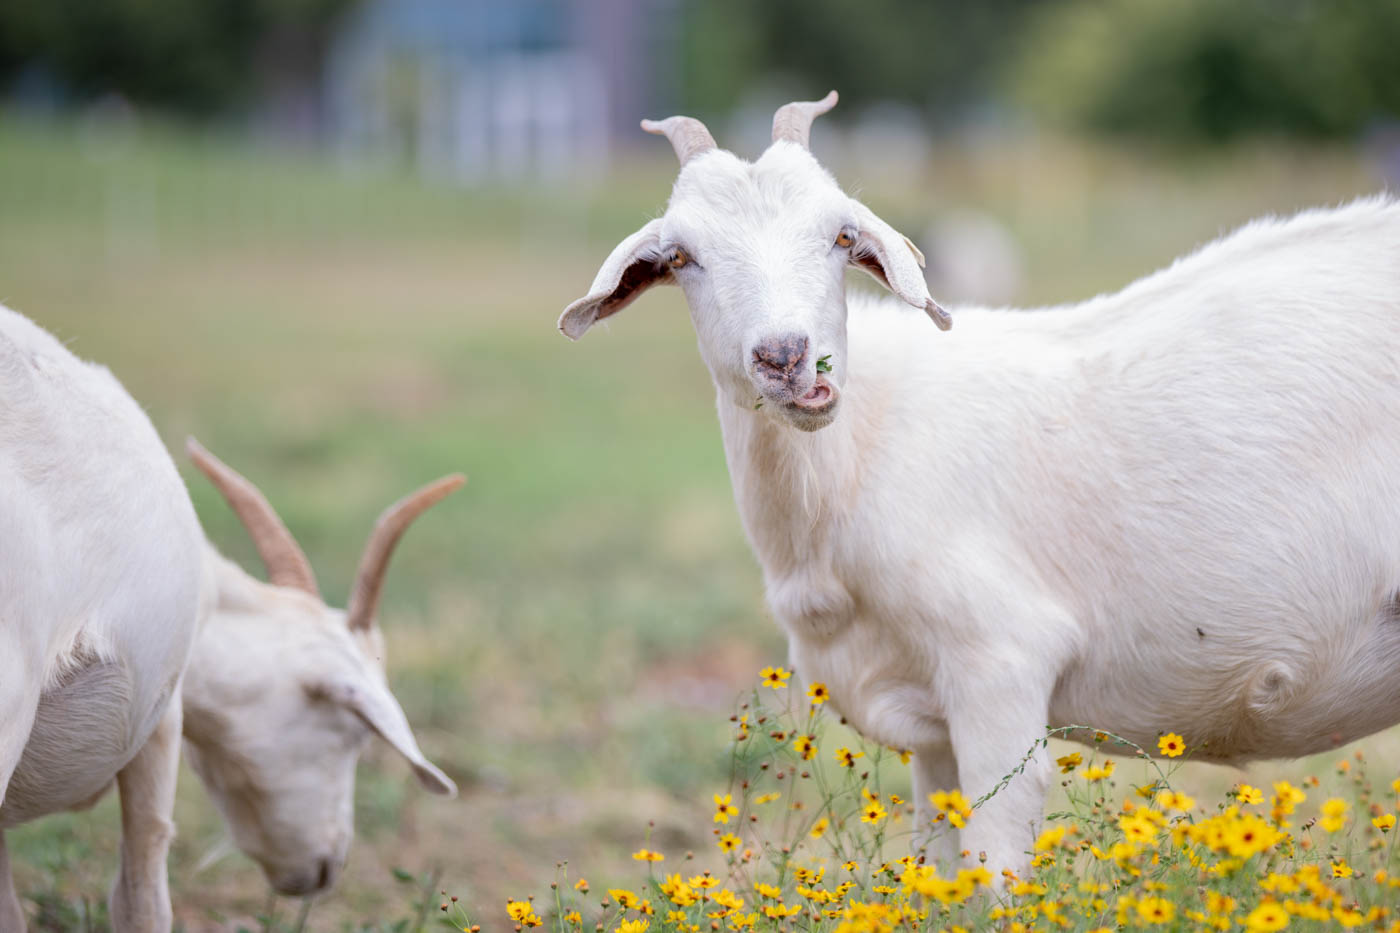 A goat chews grass from one of the lots by the innovation campus on Sept. 14. There was a total of 140 goats on campus.